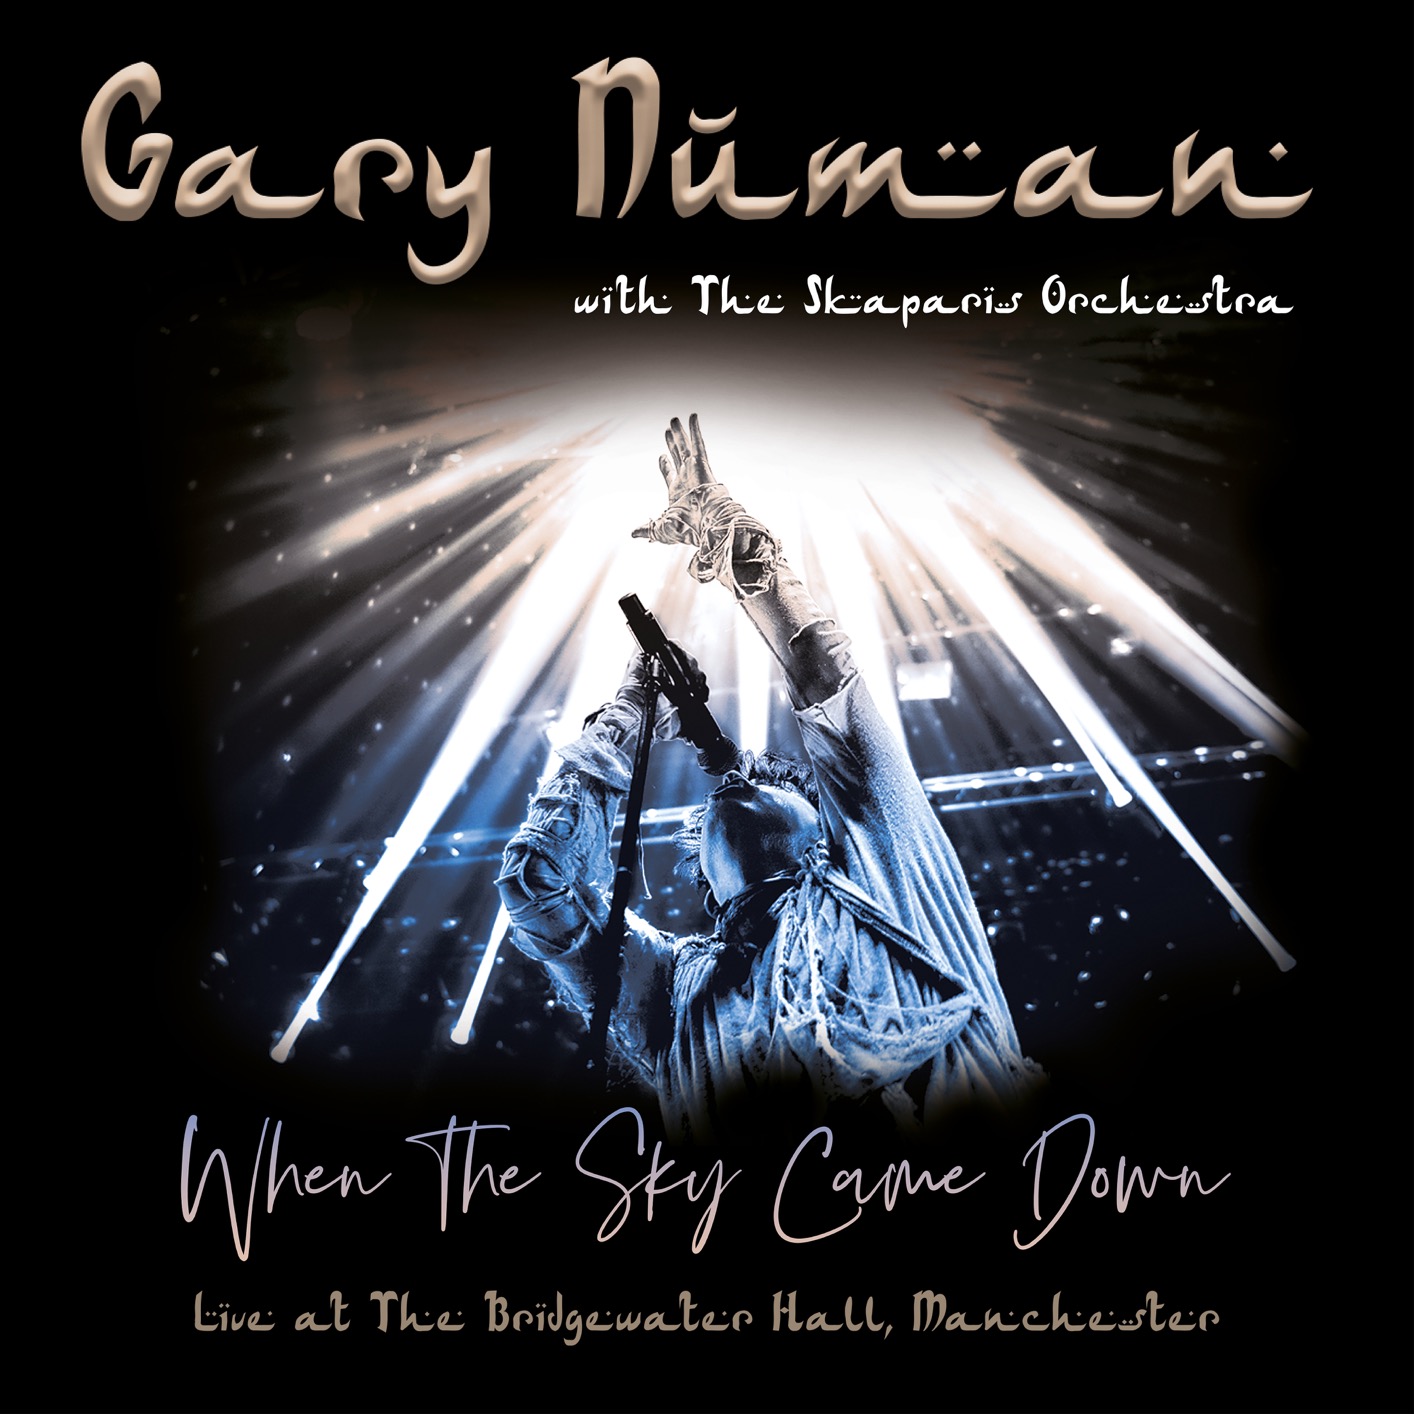 Gary Numan & The Skaparis Orchestra - When the Sky Came Down (Live at The Bridgewater Hall, Manchester) (2019) [FLAC 24bit/44,1kHz]